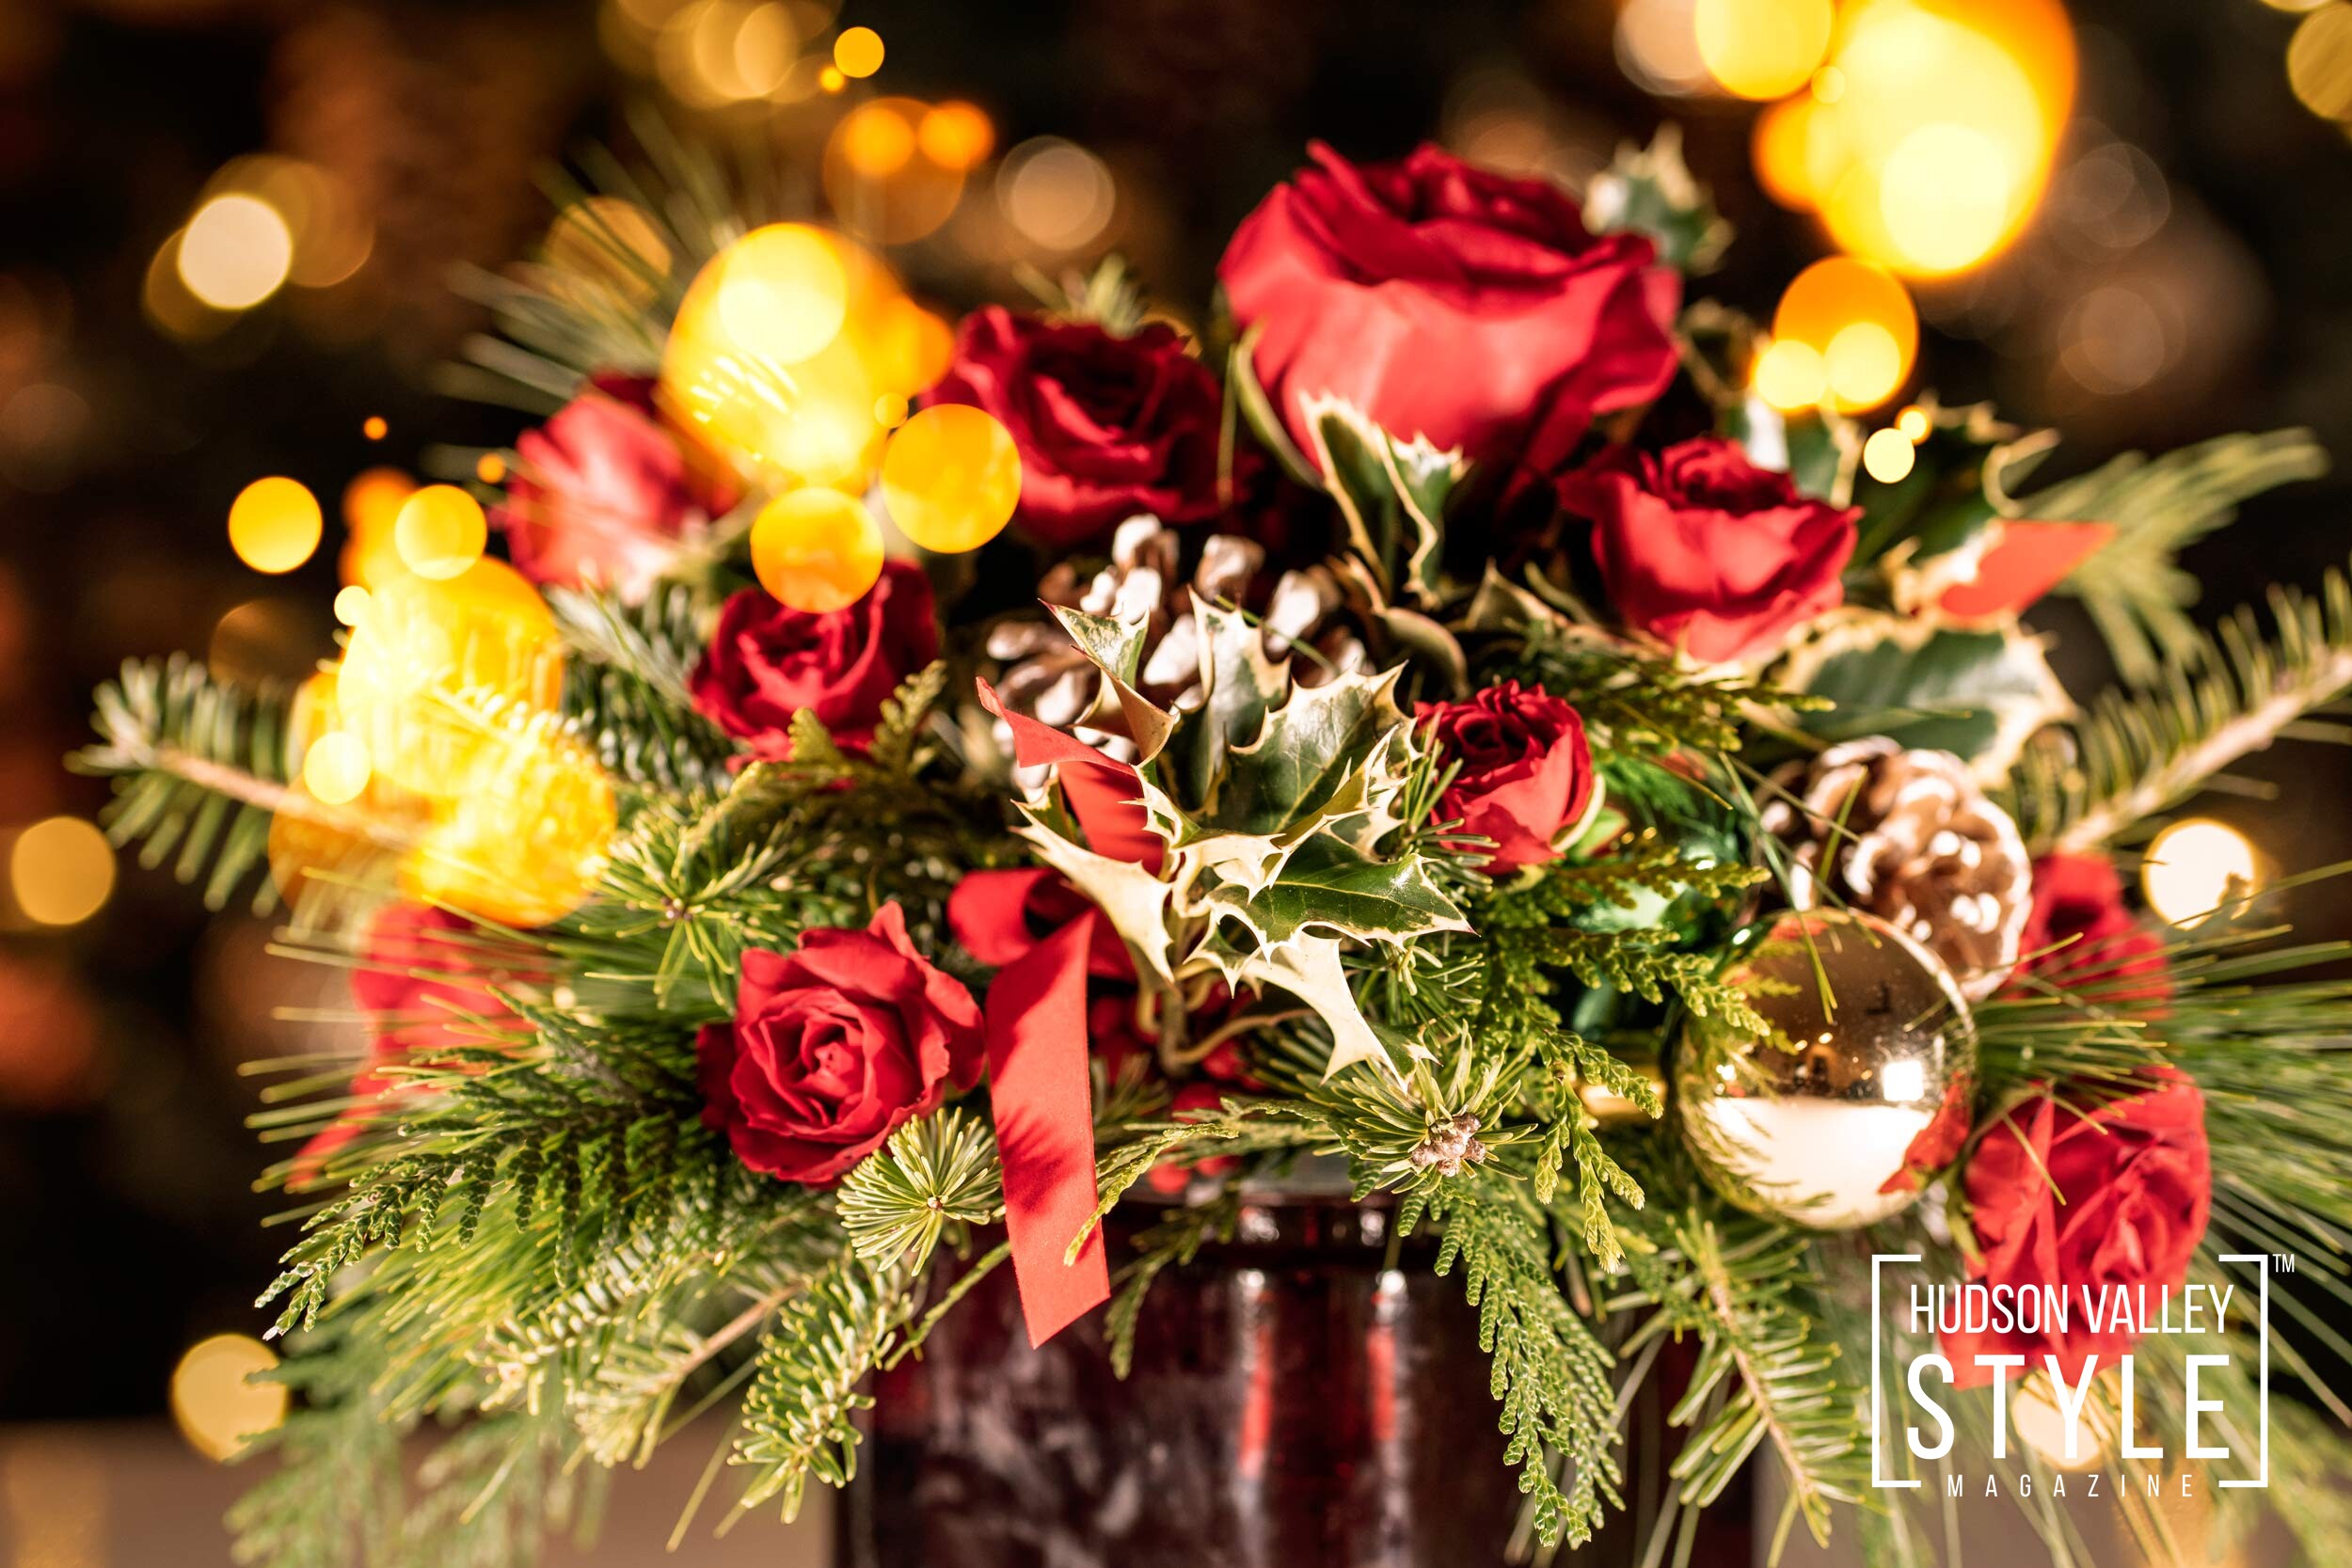 Mystic Rose Florist in Montgomery, NY - Hudson Valley Style Holiday Gift Guide